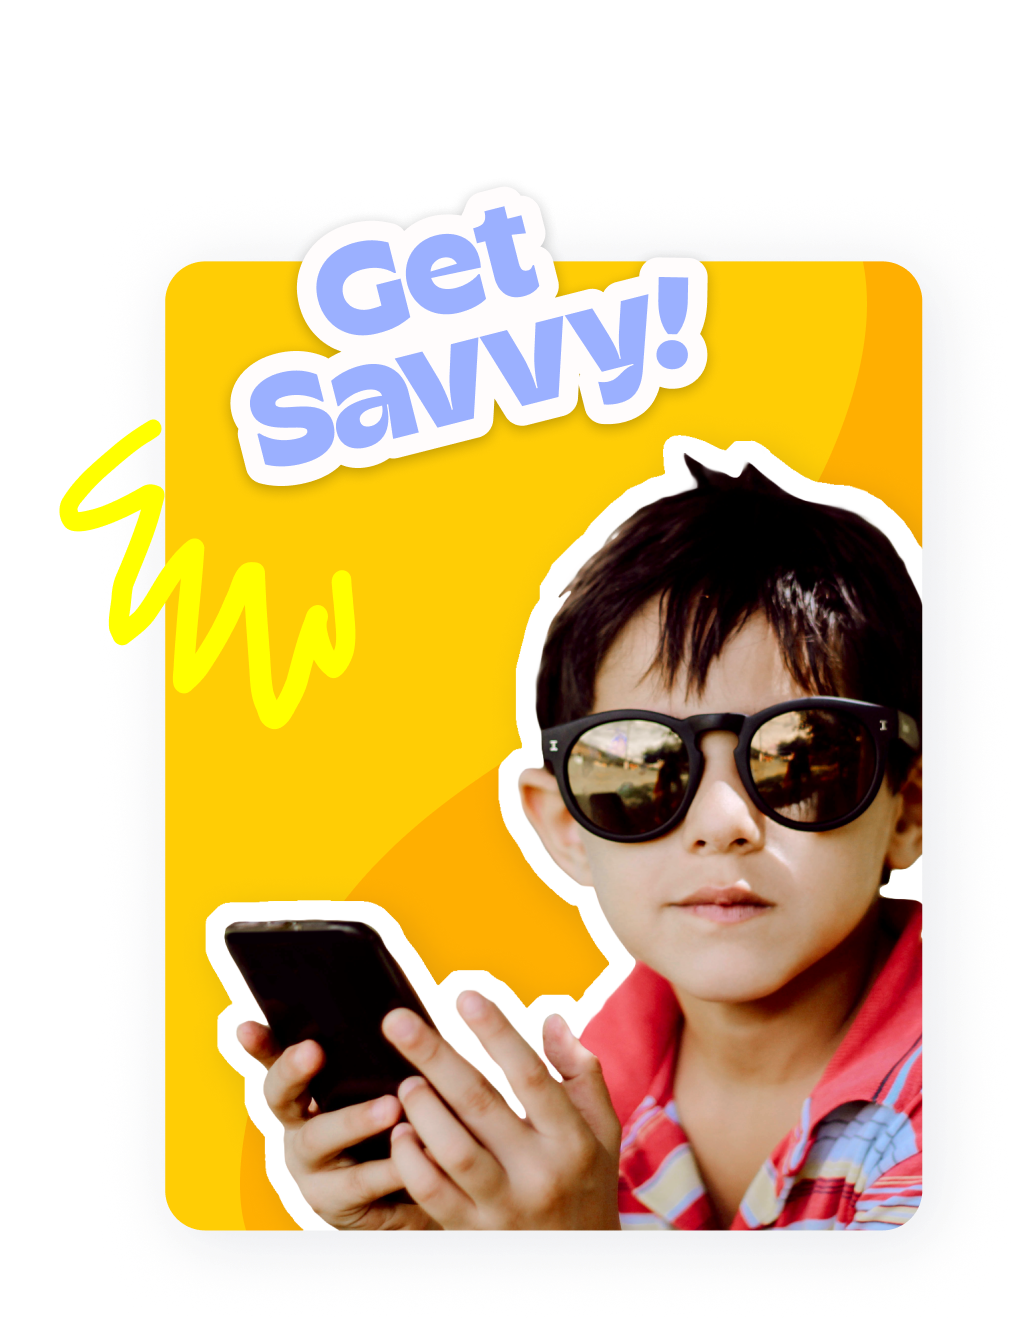 Get savvy! Boy holding a mobile phone